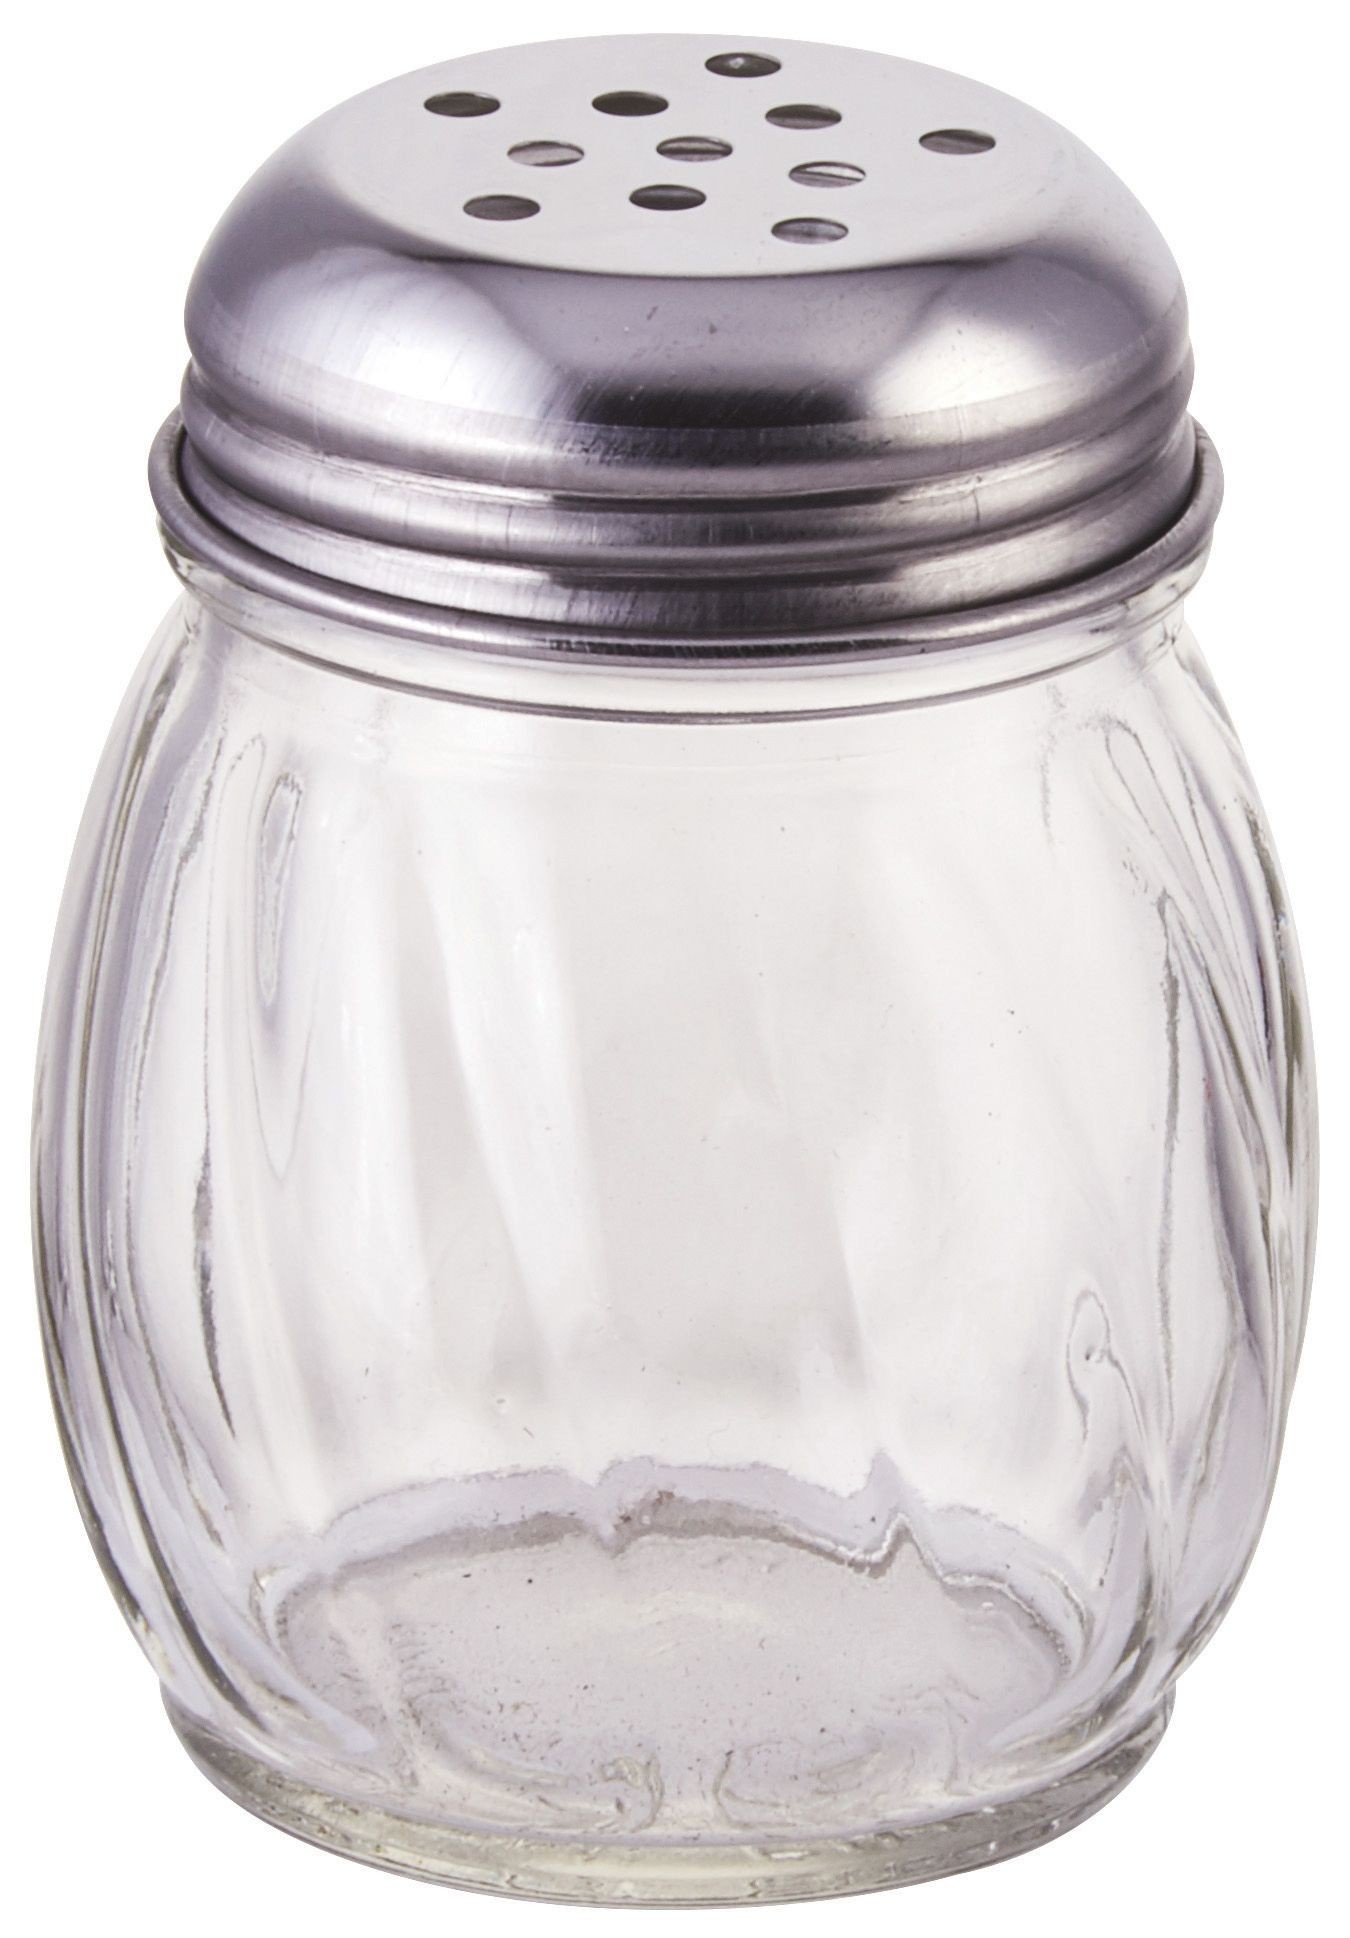 Winco G-307 Cheese Shaker 6 oz. with Perforated Top